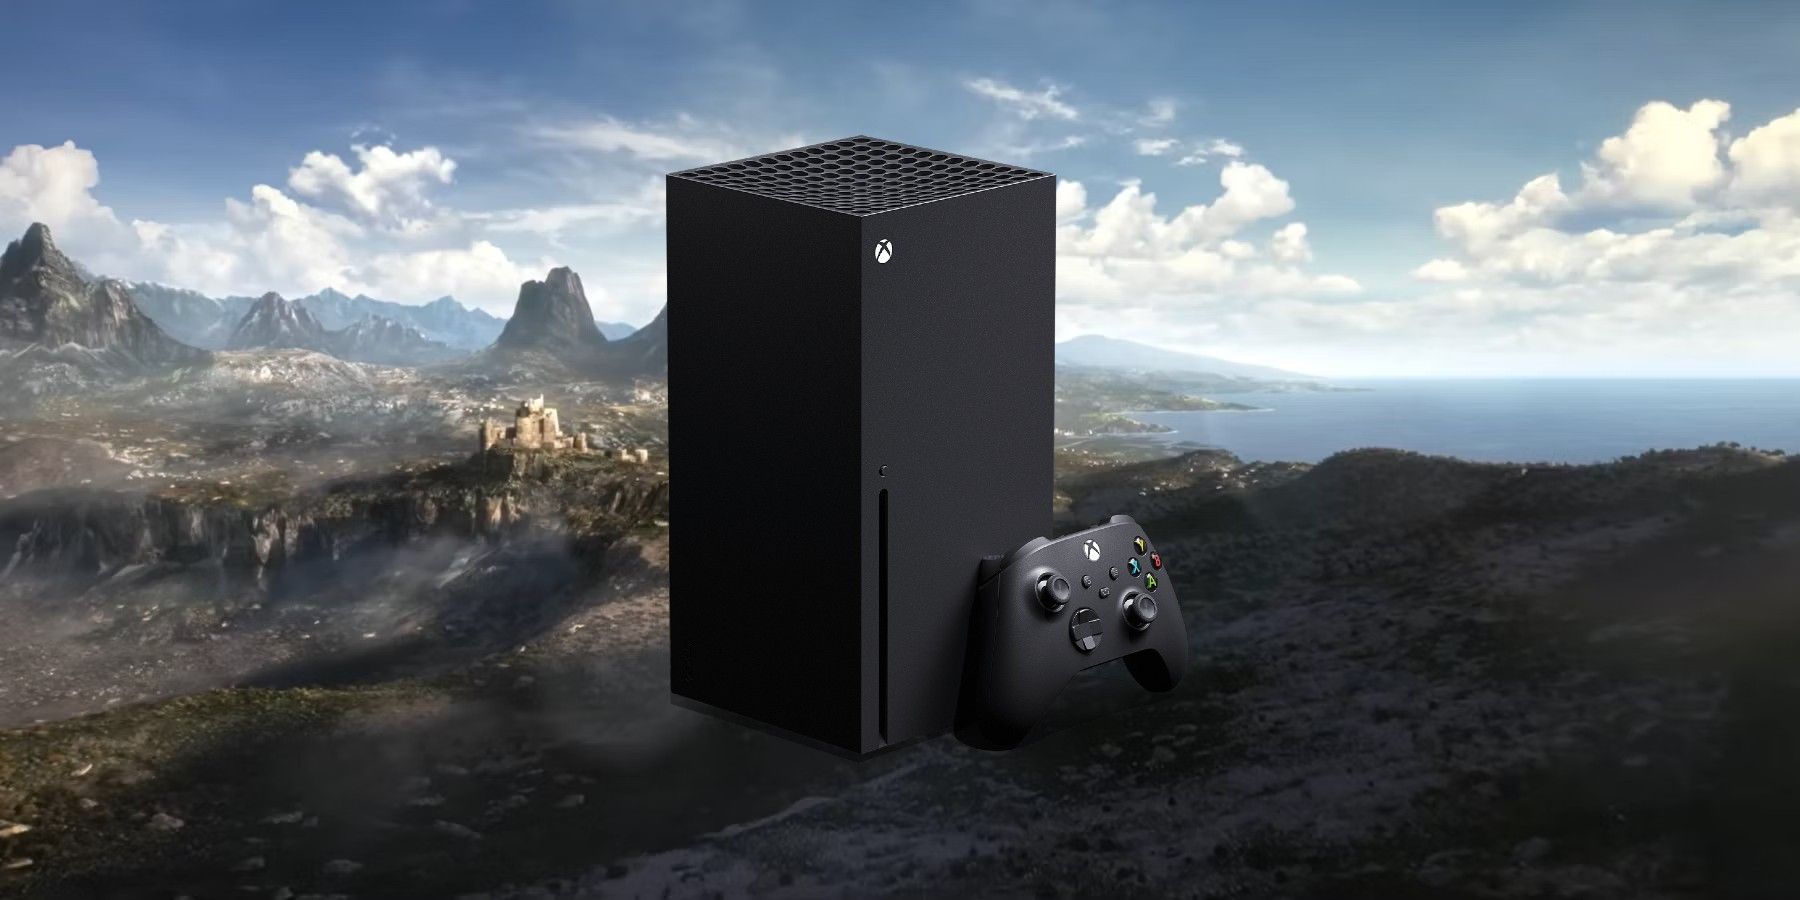 elder scrolls 6 key art with xbox series x and controller